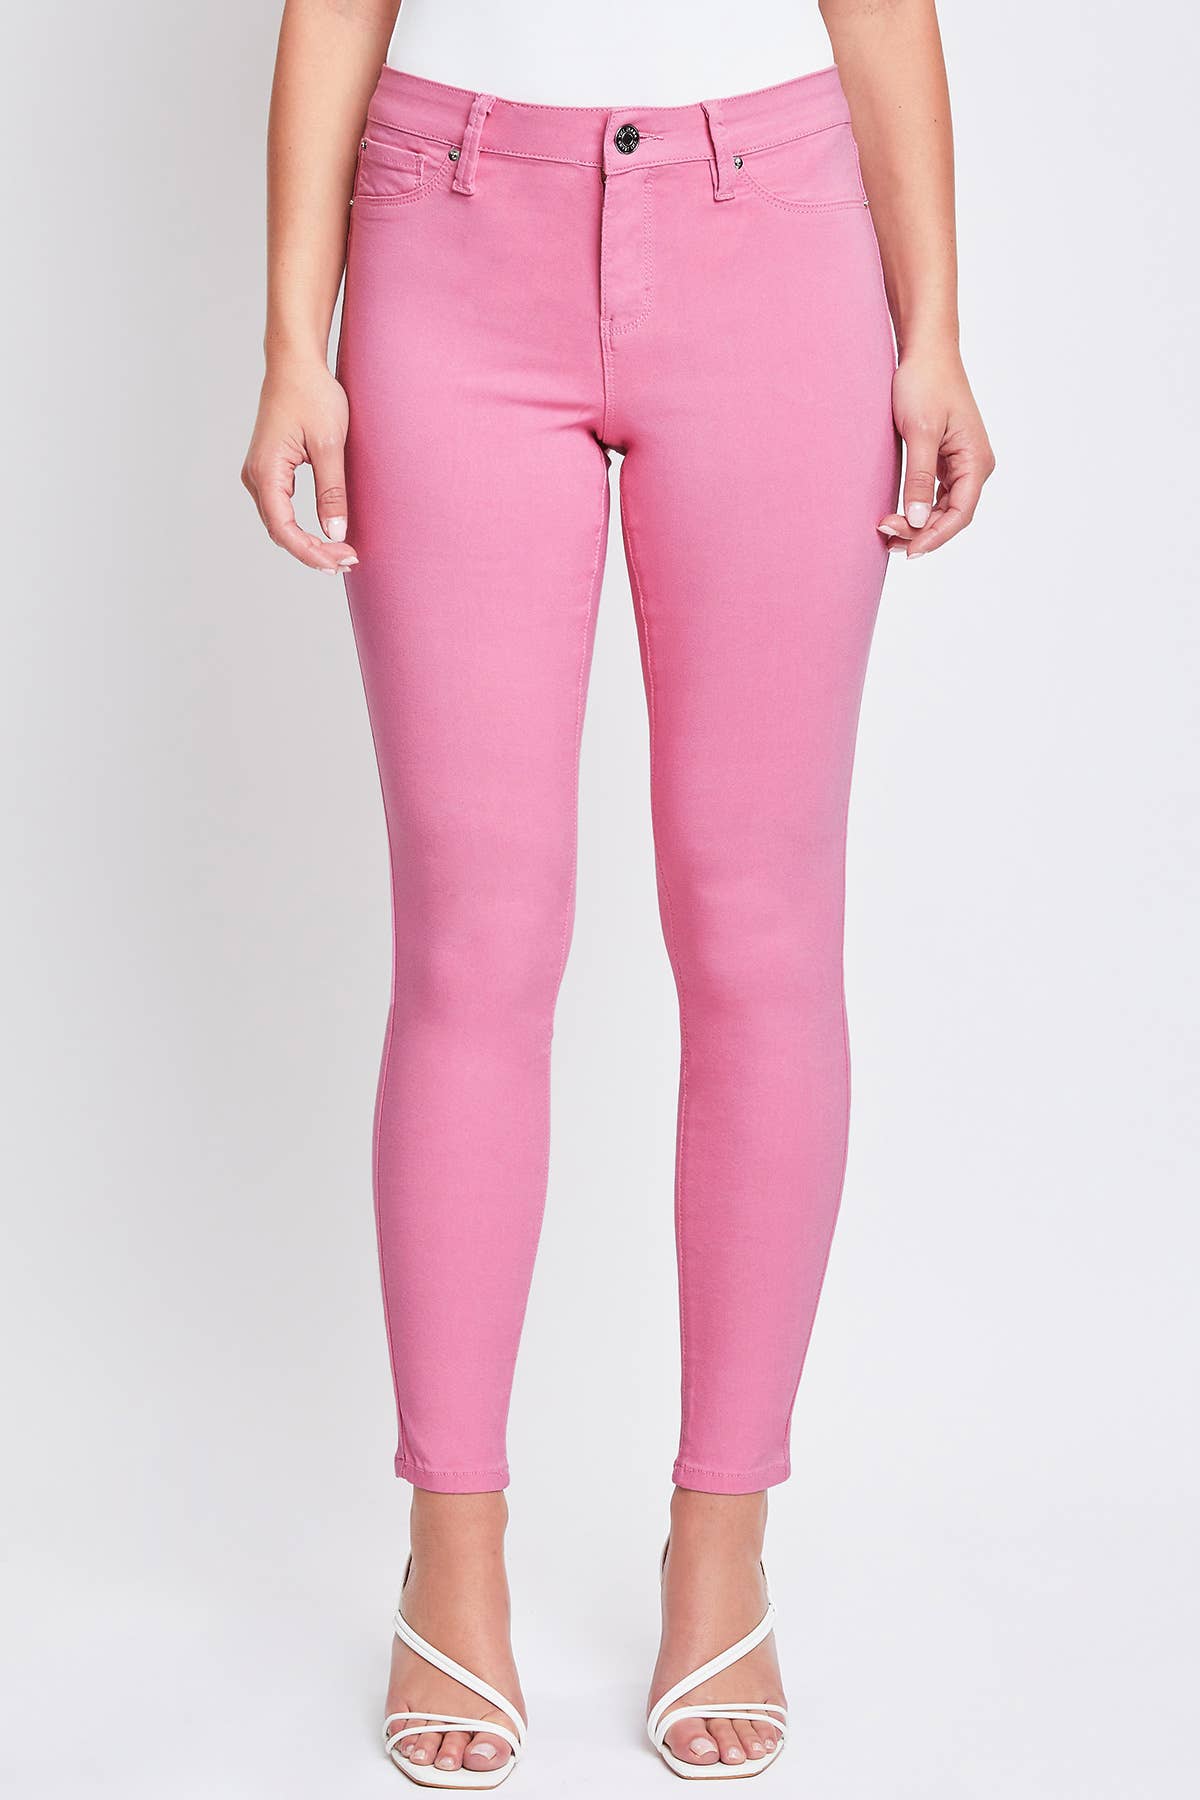 Flamingo Hyperstretch Mid-Rise Skinny Jean